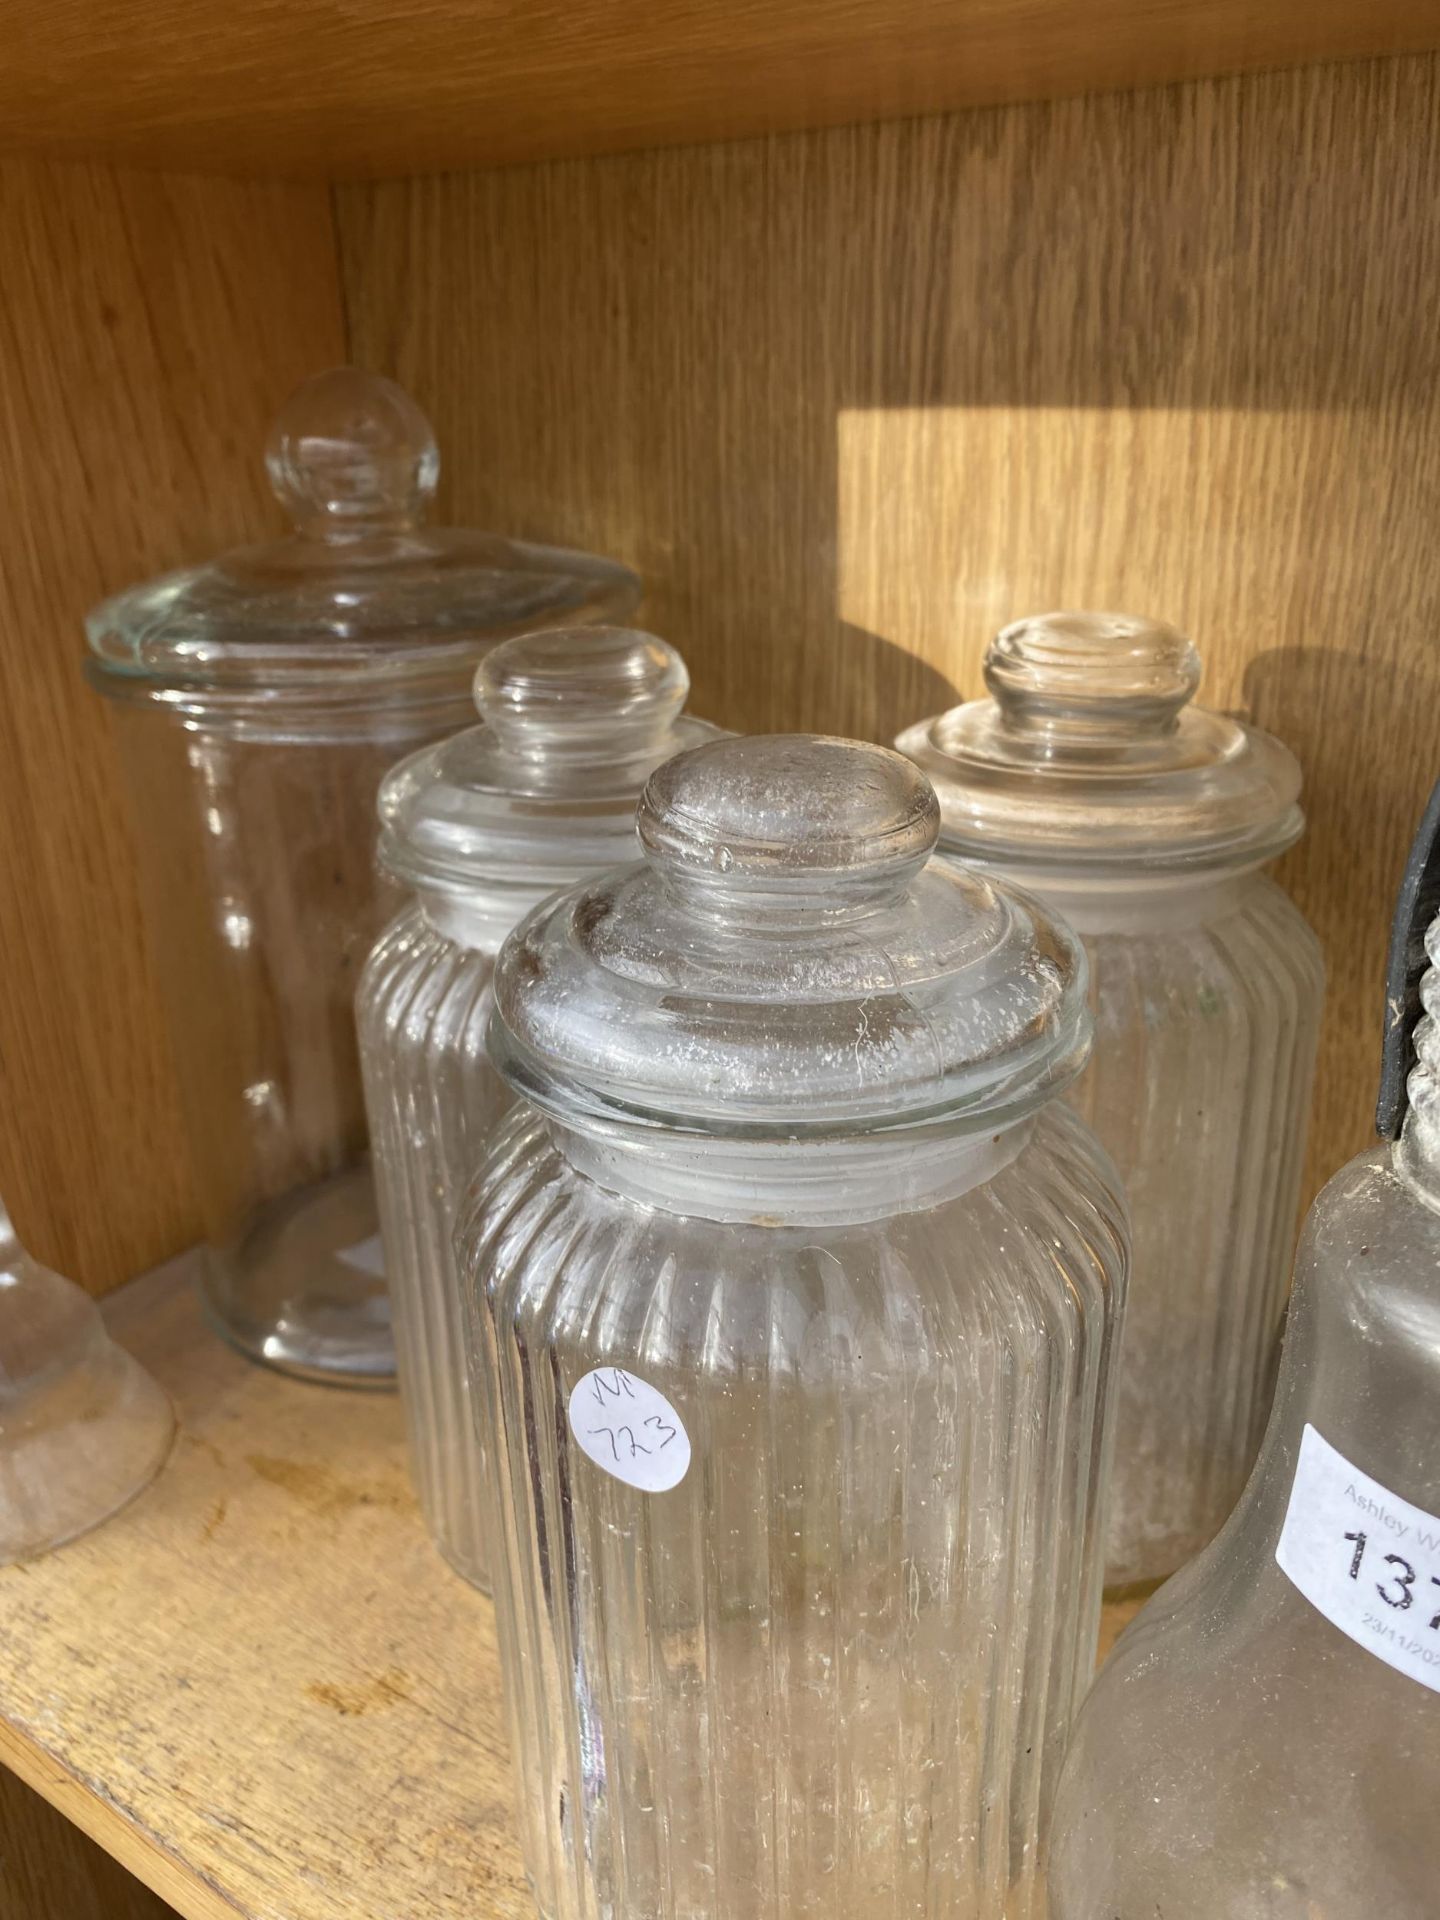 AN ASSORTMENT OF GLASS STORAGE JARS AND GLASS LIGHTS IN THE FORM OF A LIGHT BULB ETC - Image 3 of 3